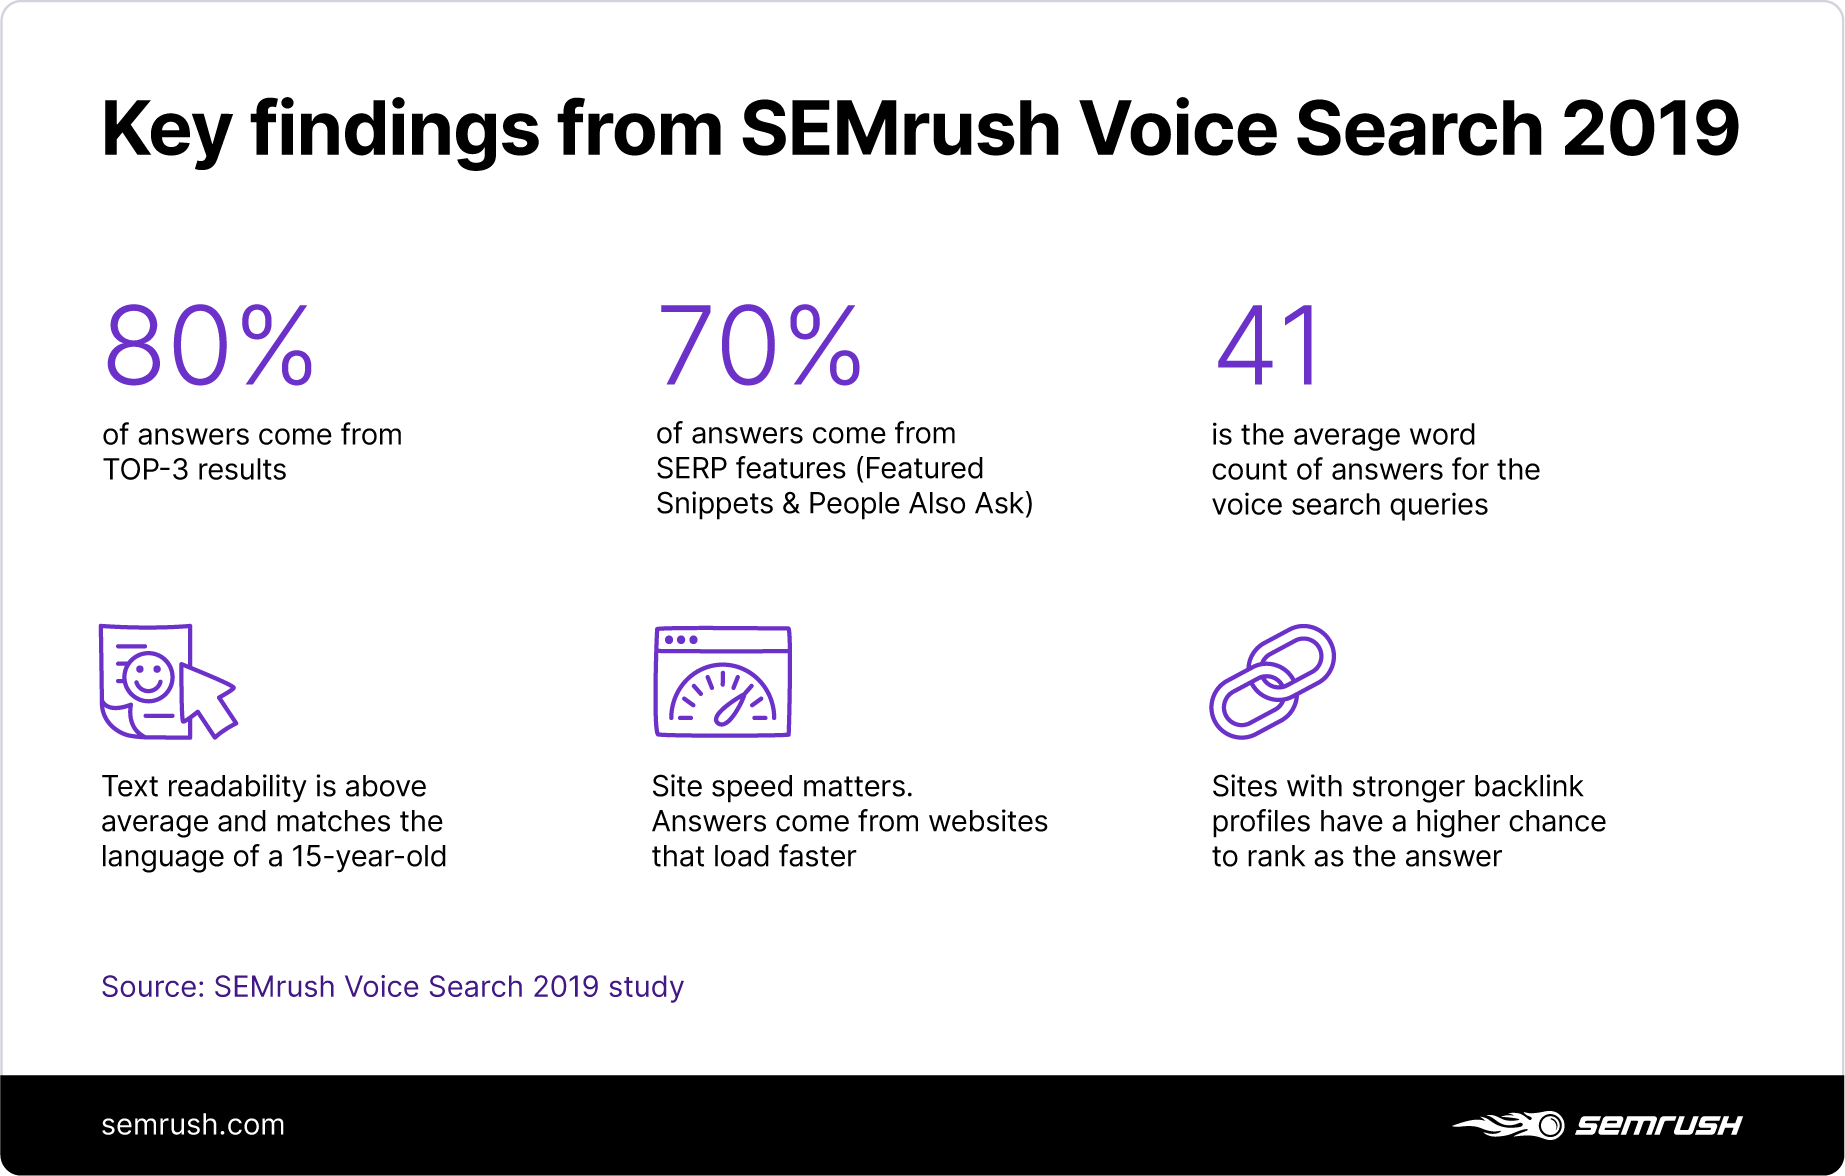 Key findings from SEMrush Voice Search 2019 study